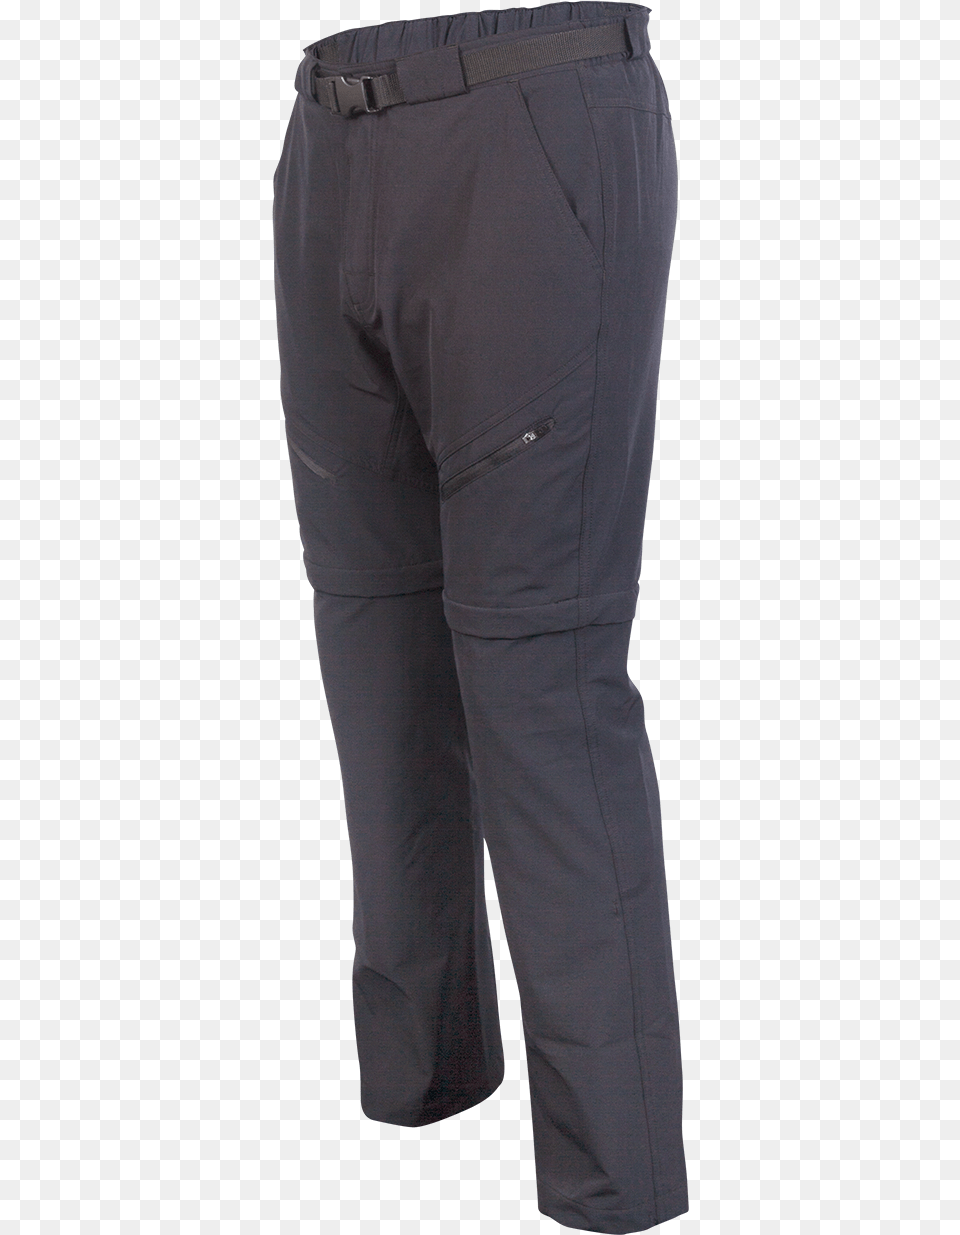 Trousers, Clothing, Jeans, Pants Png